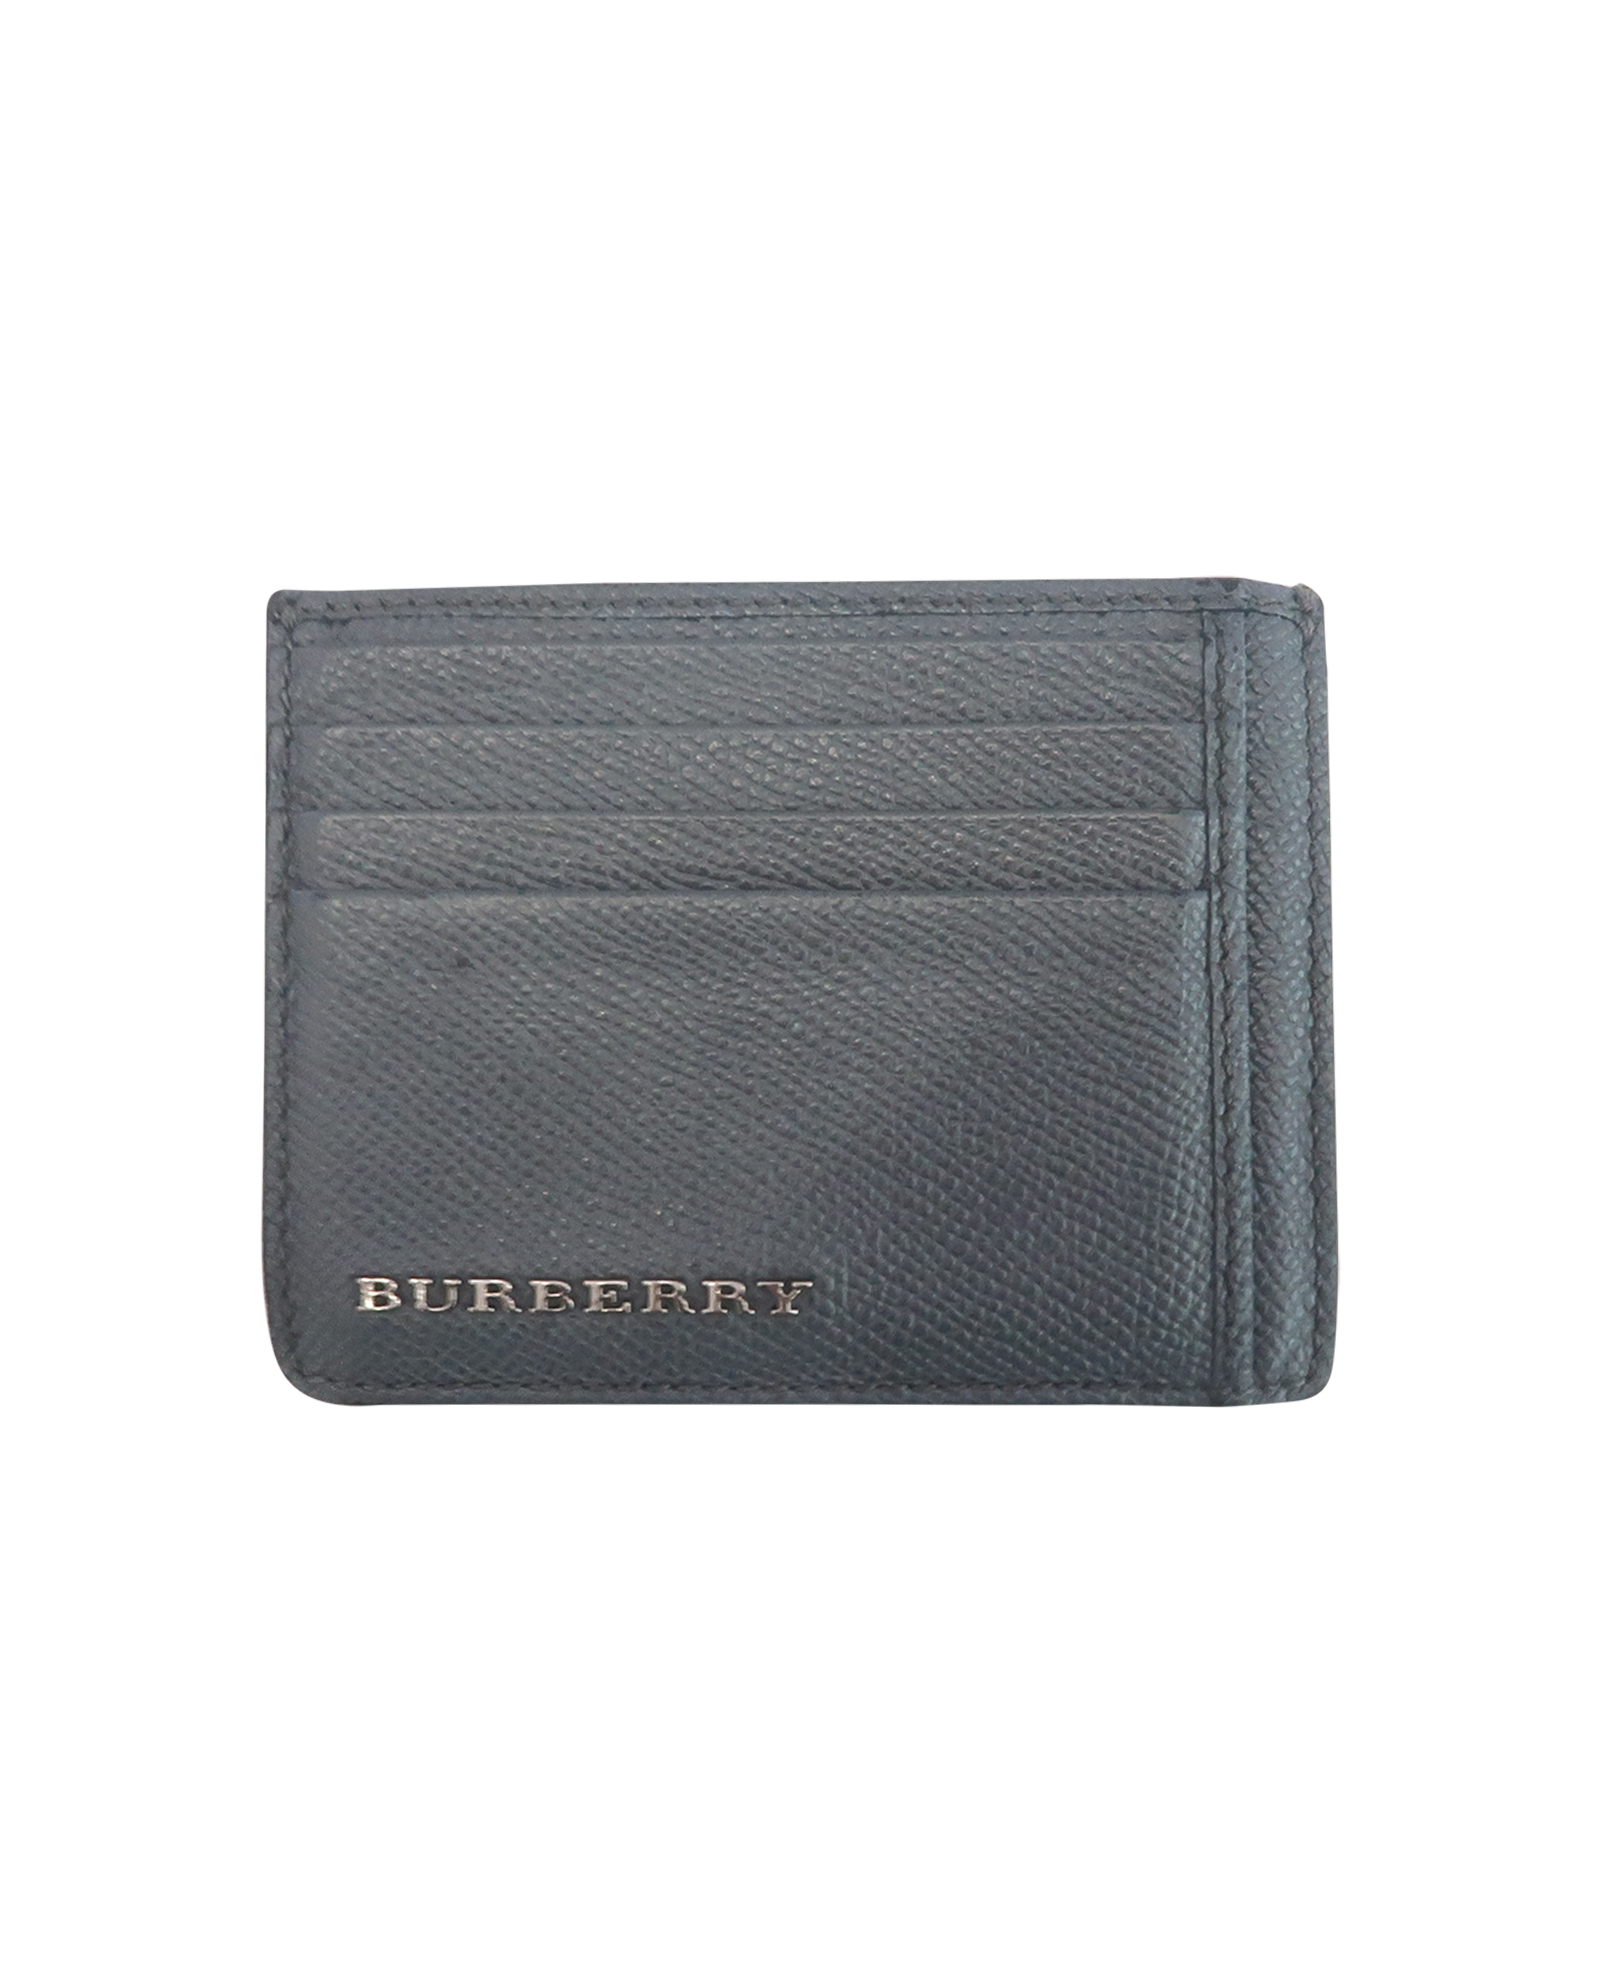 Burberry Card Holder, Small Leather Goods - Designer Exchange | Buy Sell  Exchange